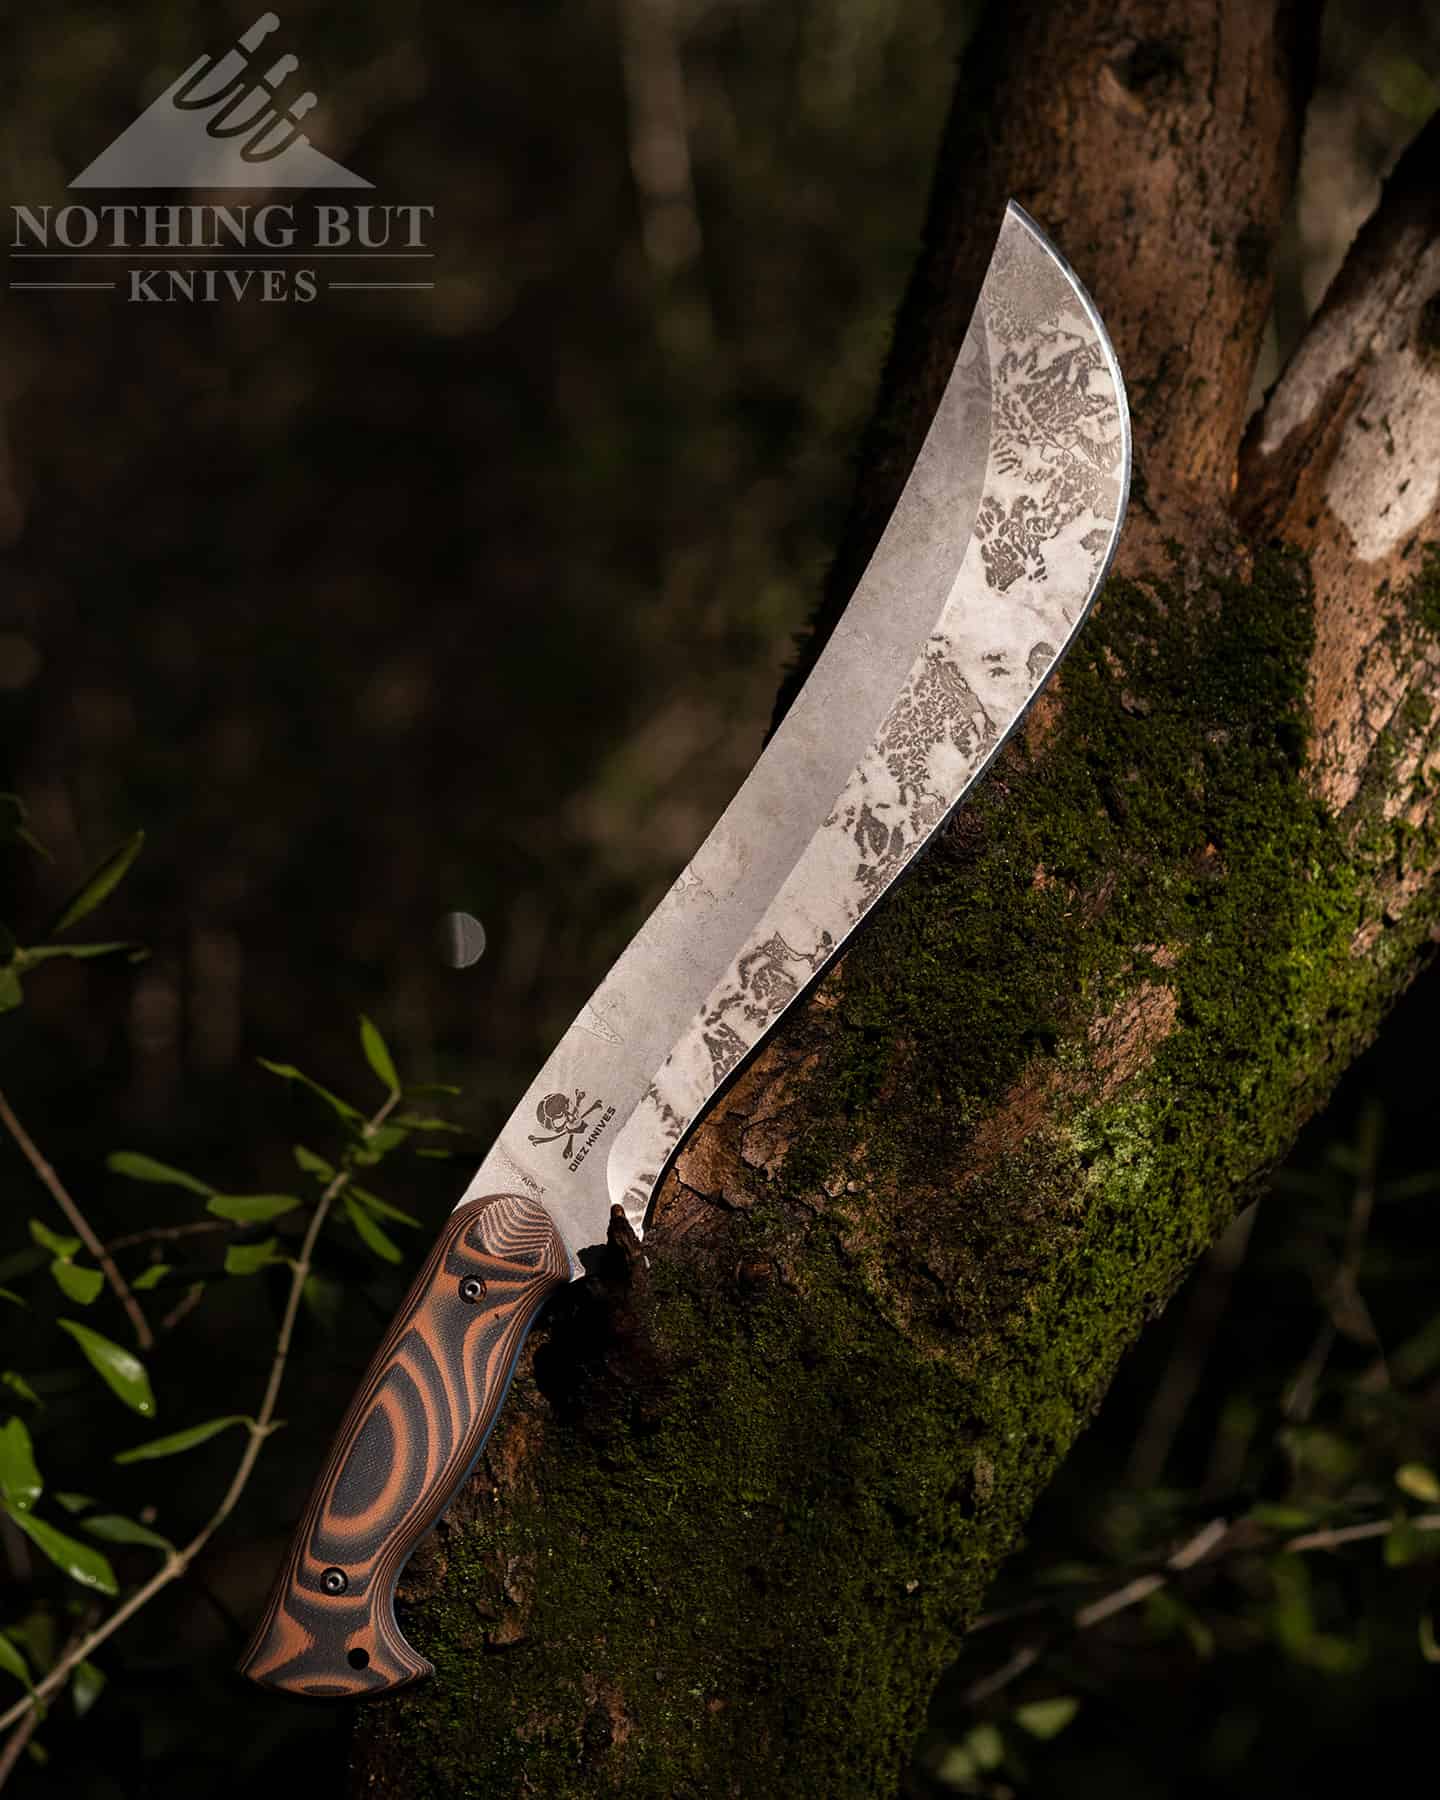 The Work Tuff Gear Apex knife has excellent fit and finish and a great looking forced patina on the blade. 